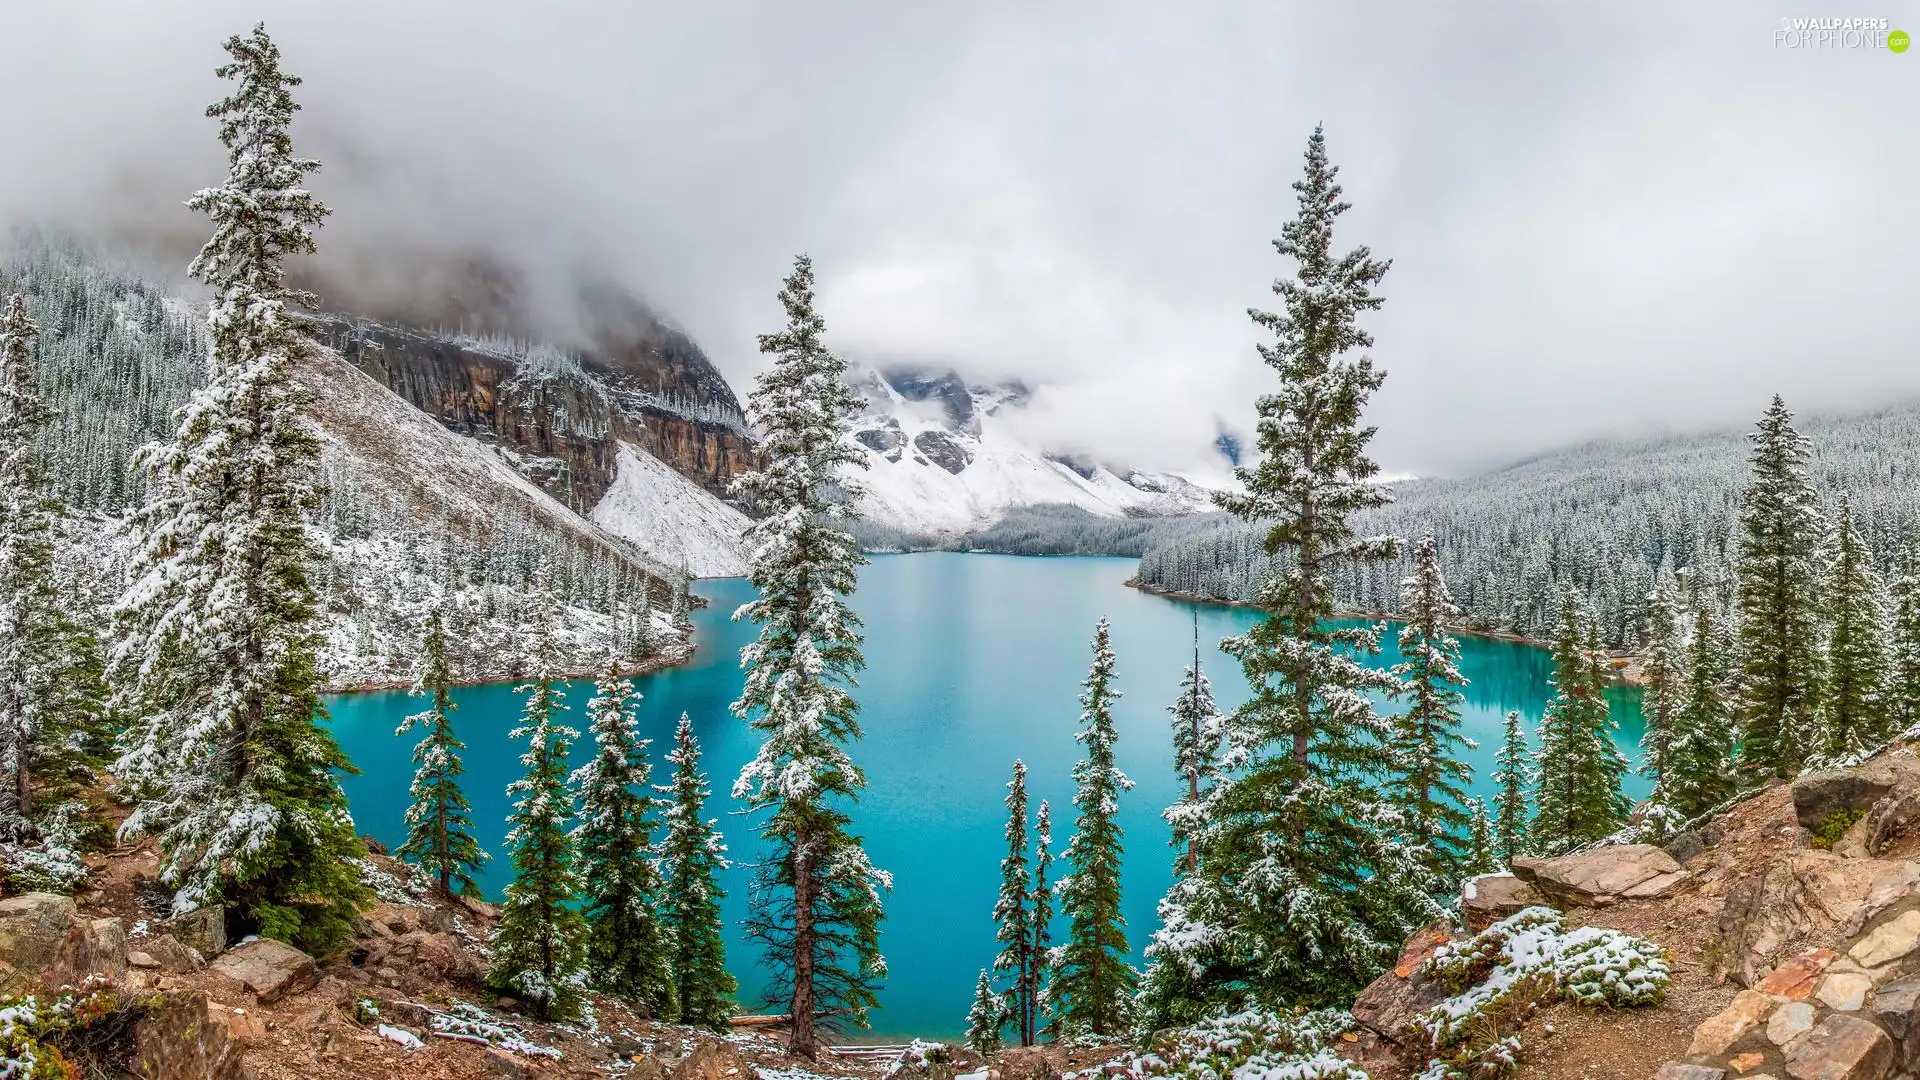 Alberta, Mountains, trees, Banff National Park, woods, winter, viewes, Spruces, Stones, clouds, Moraine Lake, lake, snow, Canada